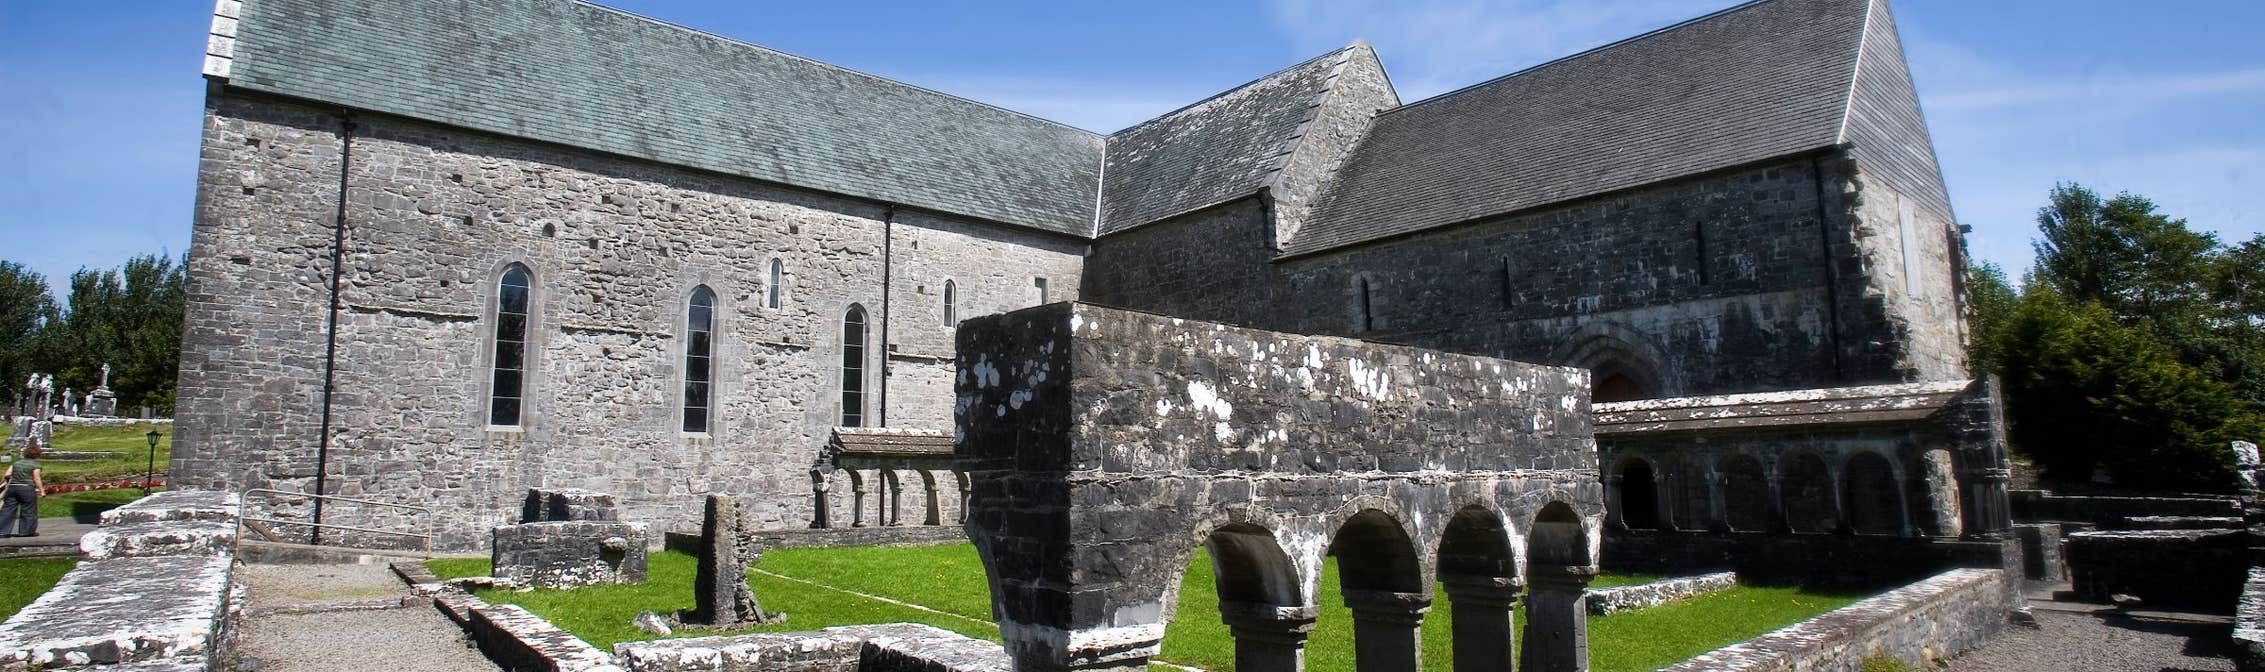 Image of a church in Ballintubber in County Mayo